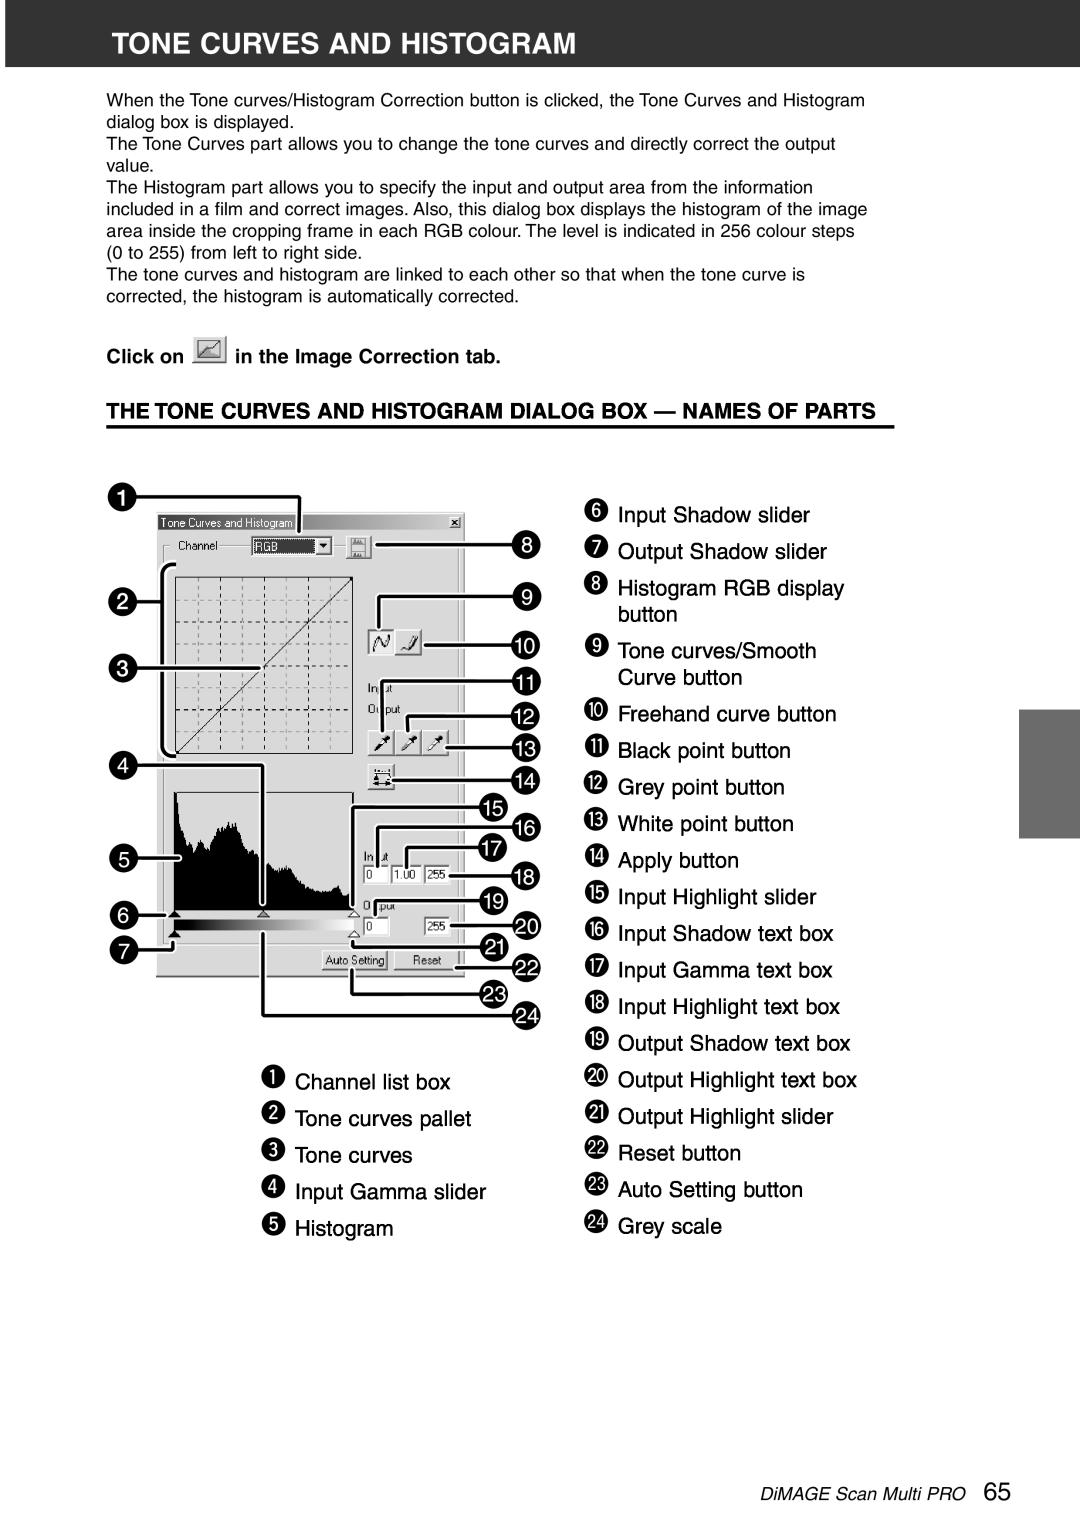 Konica Minolta Scan Multi PRO instruction manual The Tone Curves And Histogram Dialog Box - Names Of Parts 